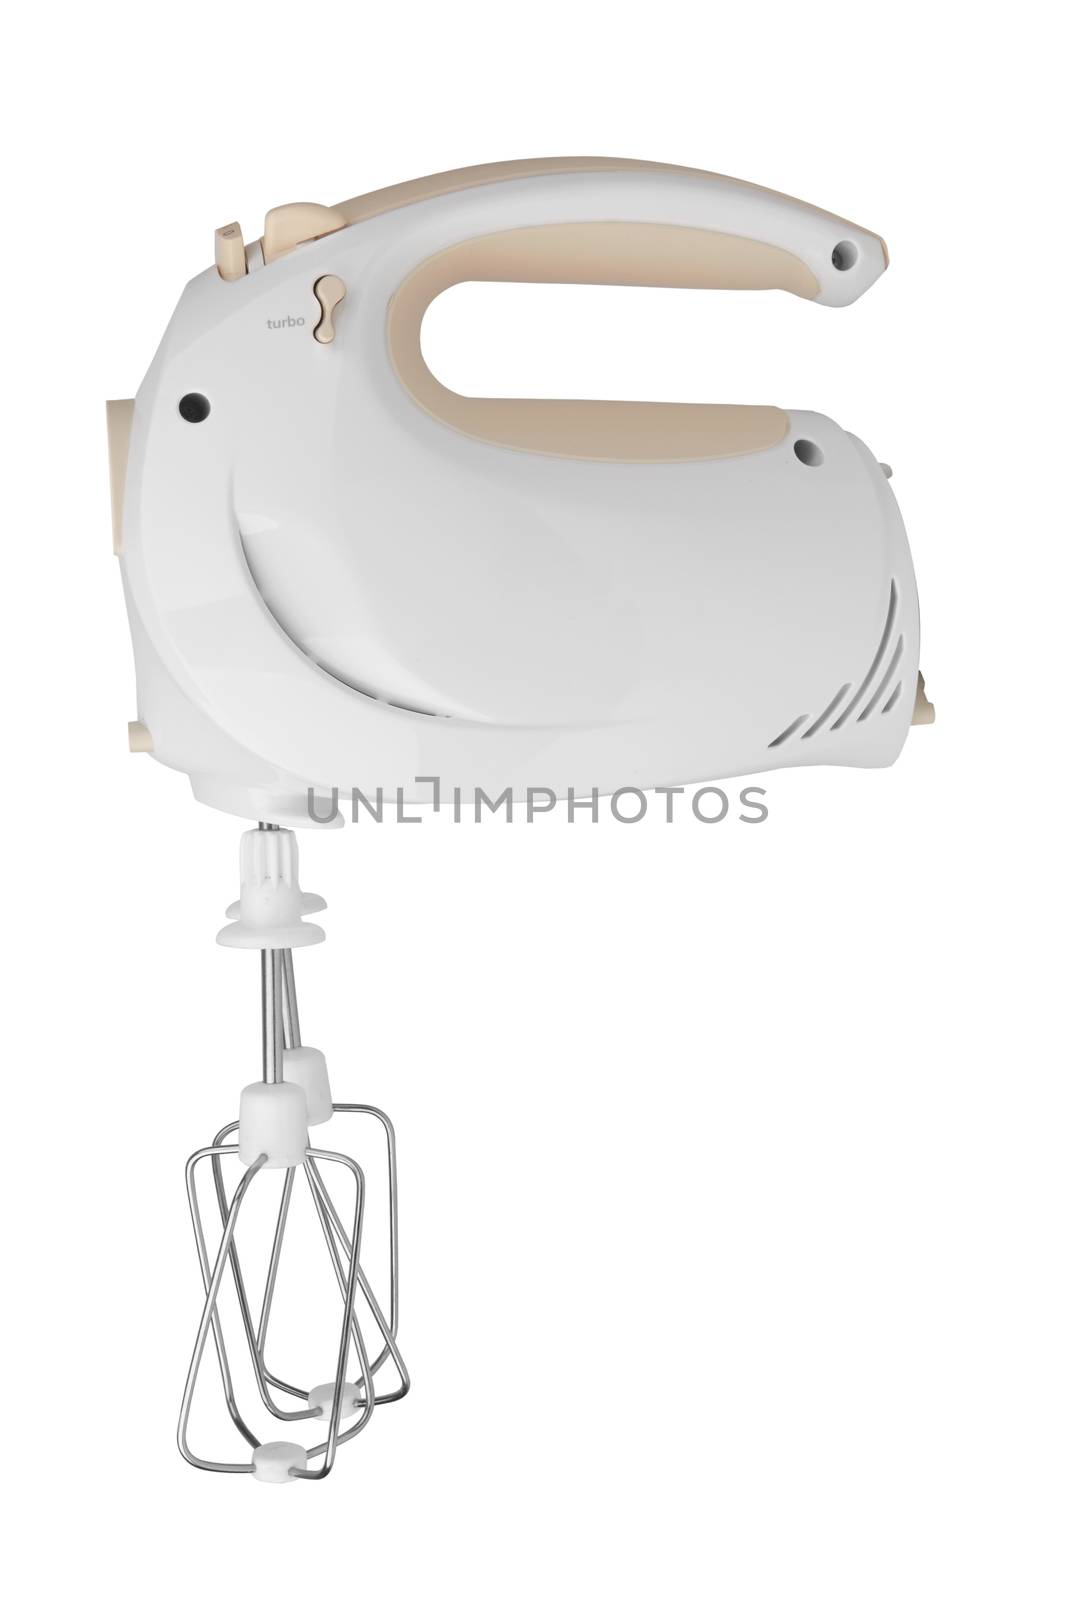 Electrical hand mixer by pioneer111